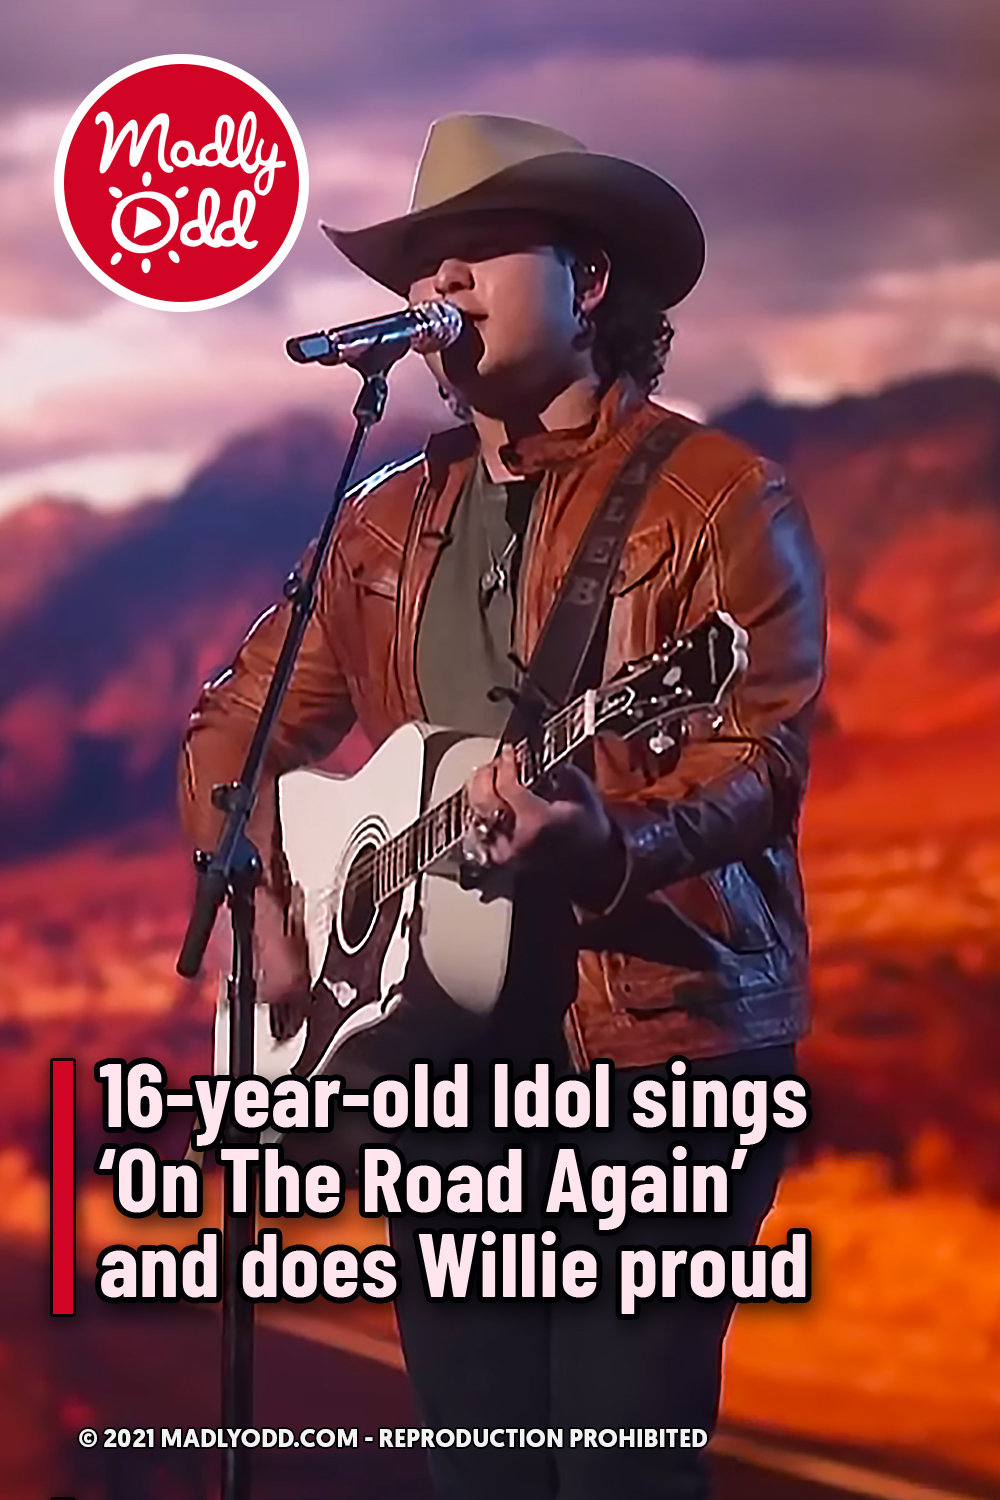 16-year-old Idol sings ‘On The Road Again’ and does Willie proud